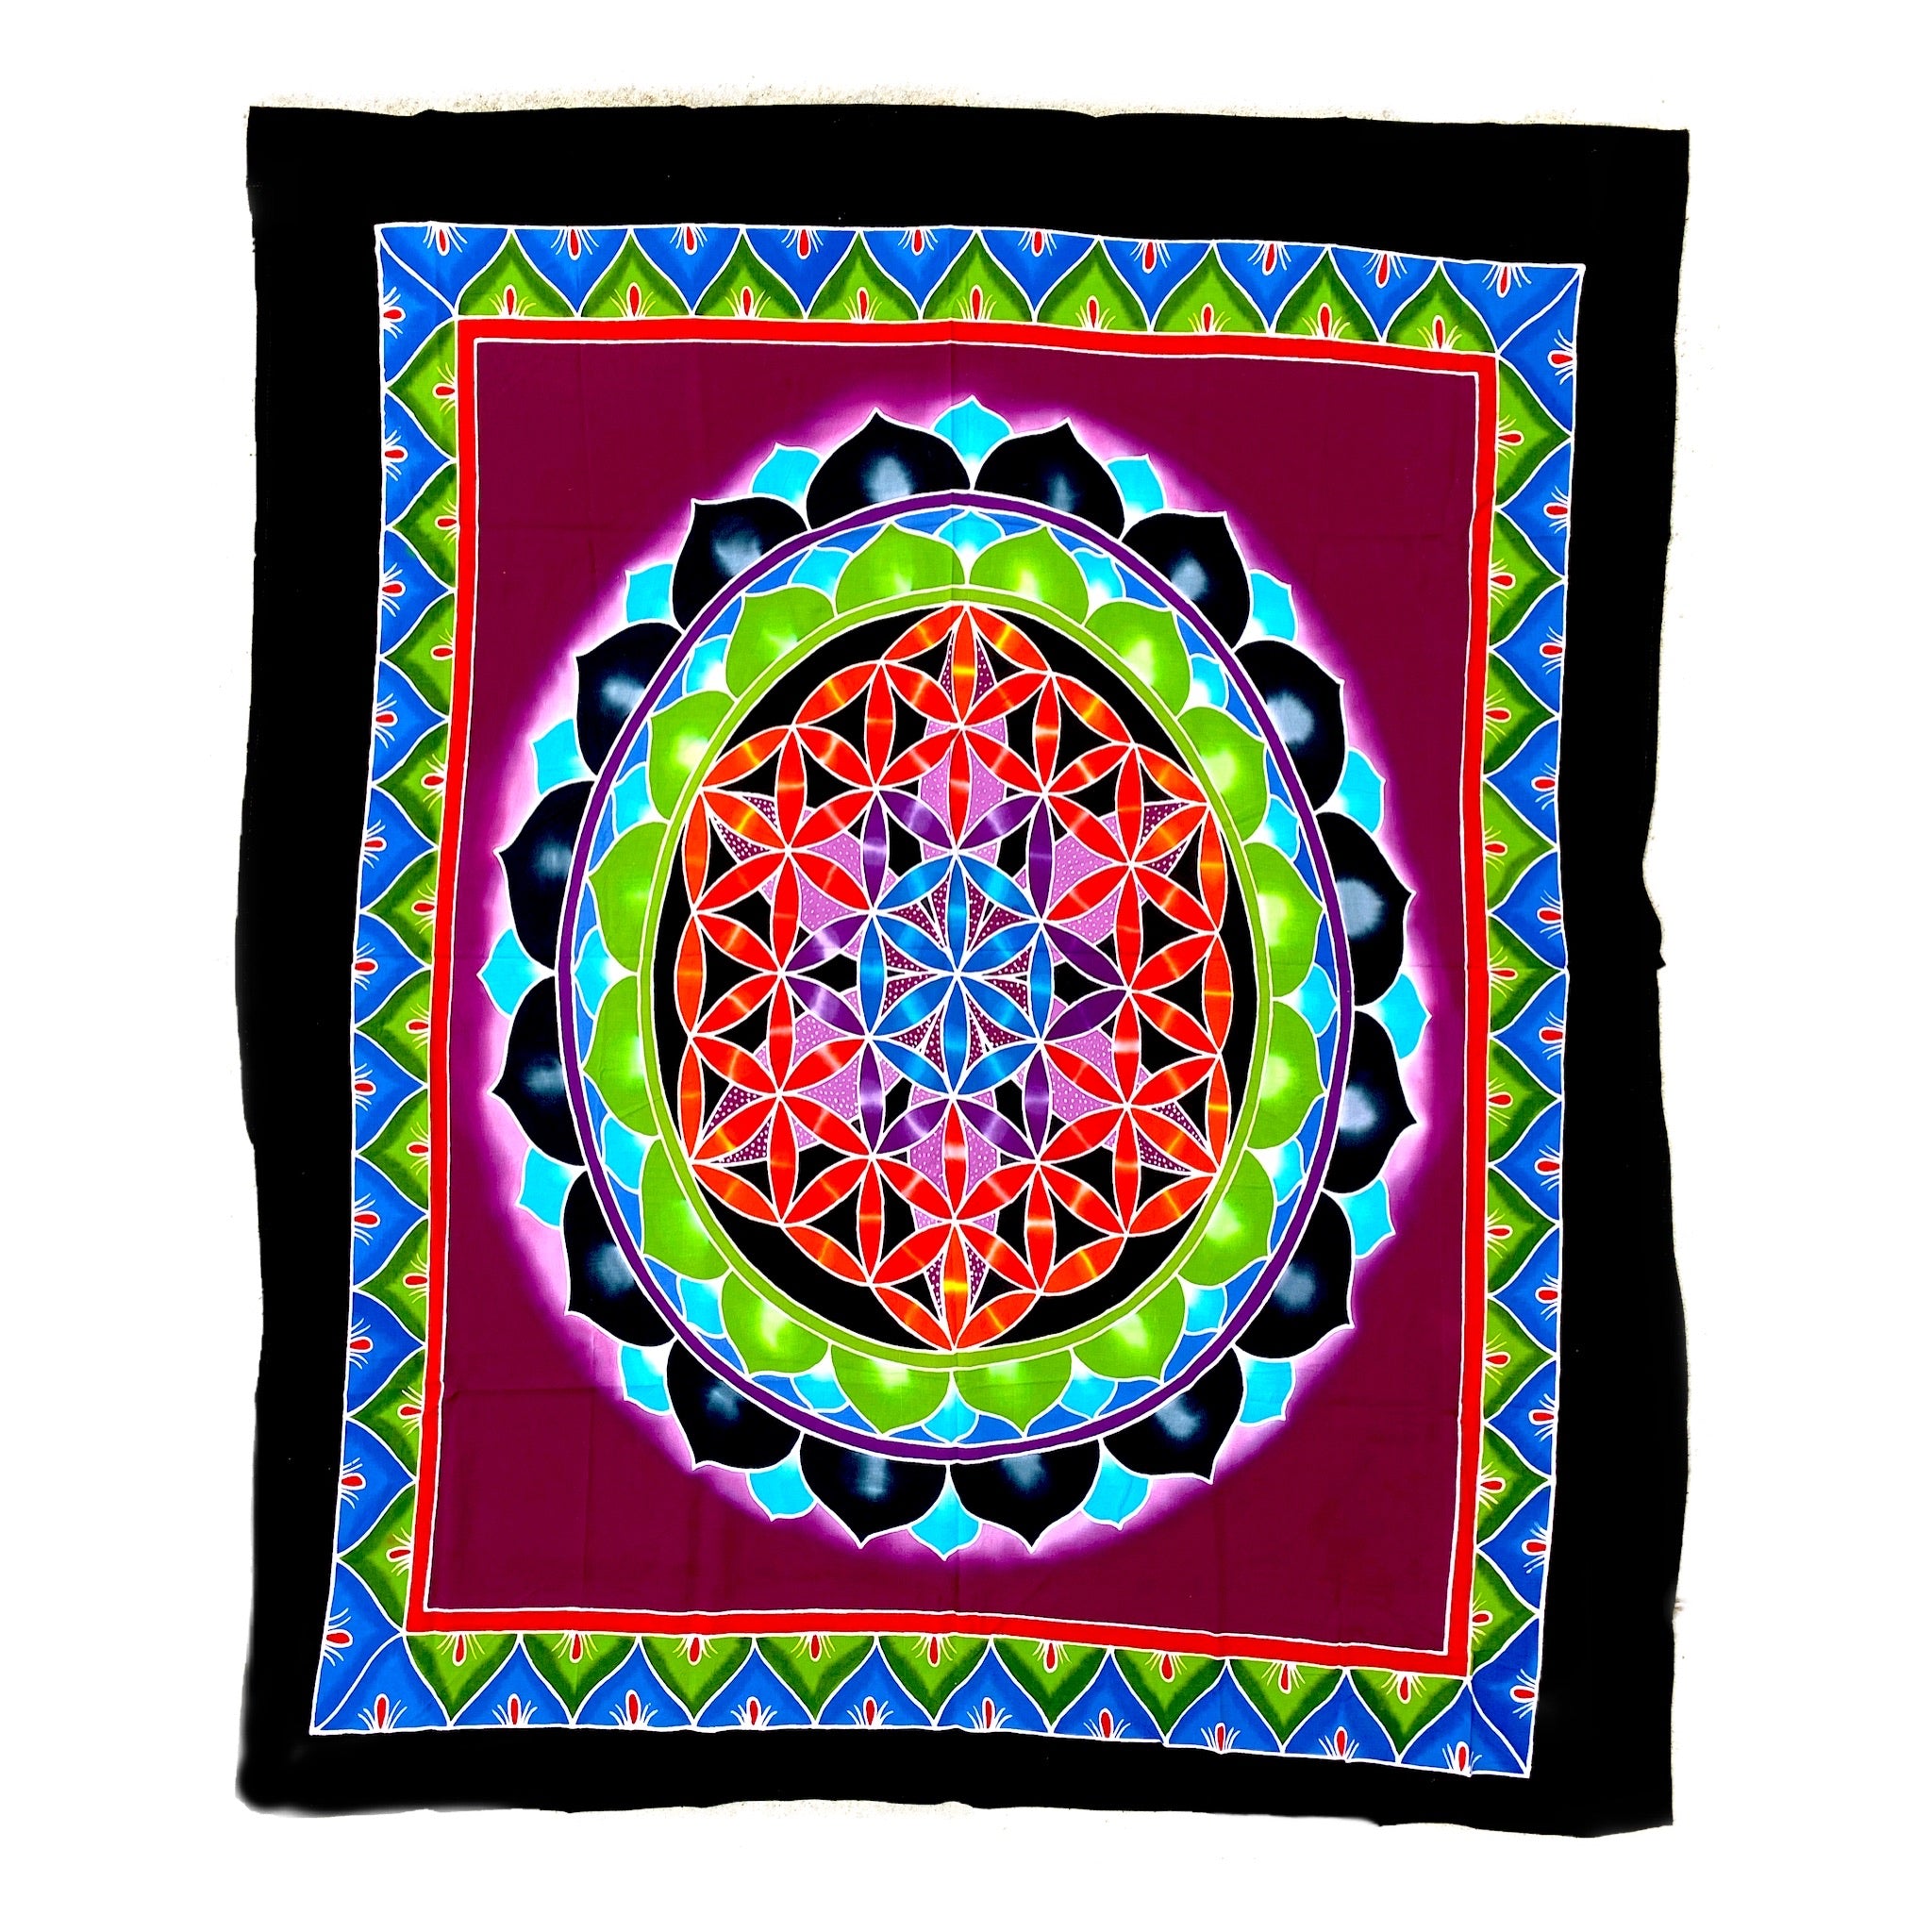 Flower of Life Batik Tapestry with Purple Background - 3 feet